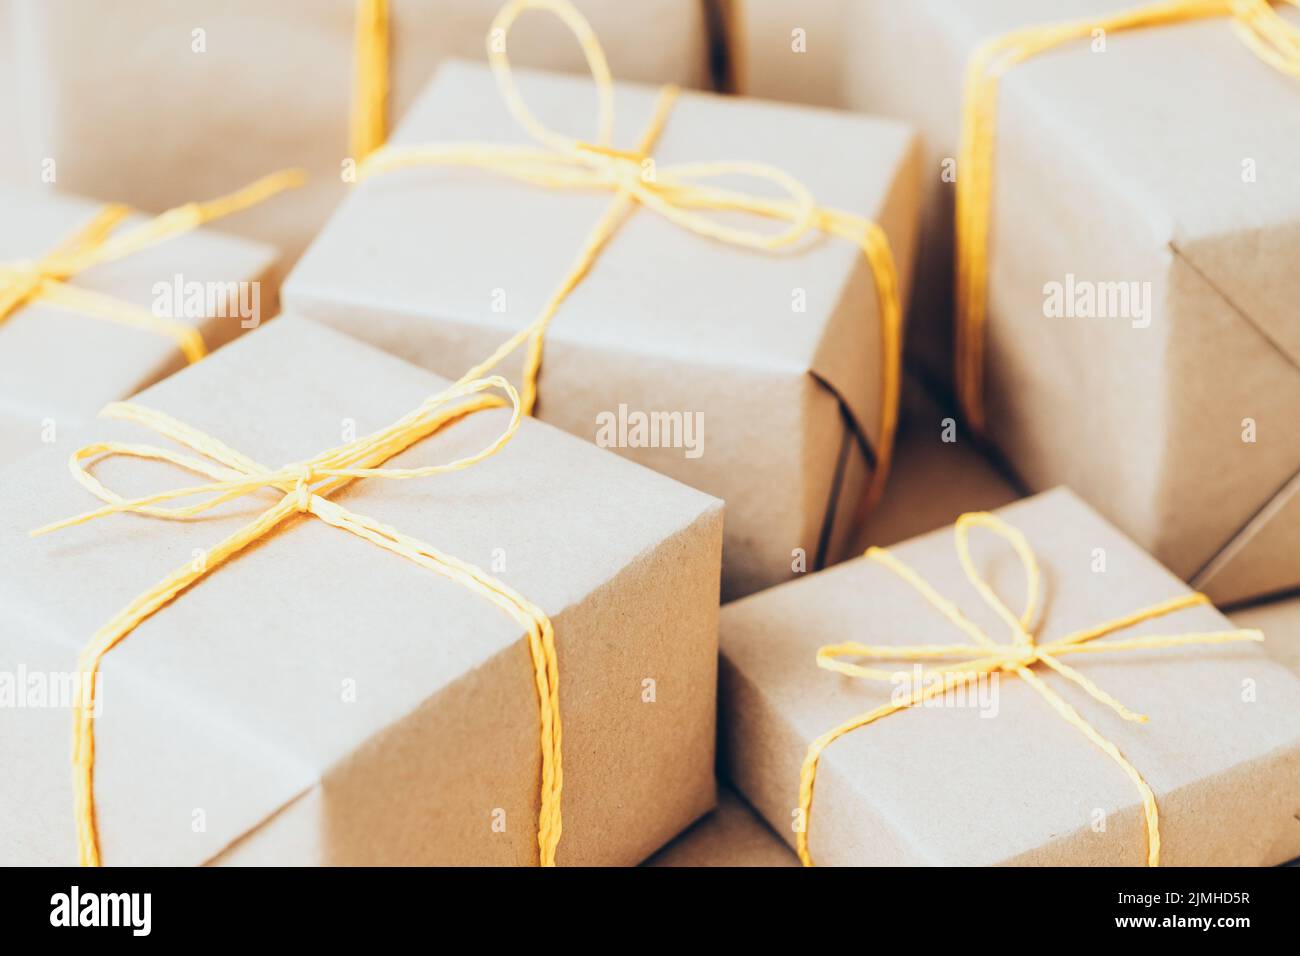 gift delivery service beige boxes yellow cord Stock Photo